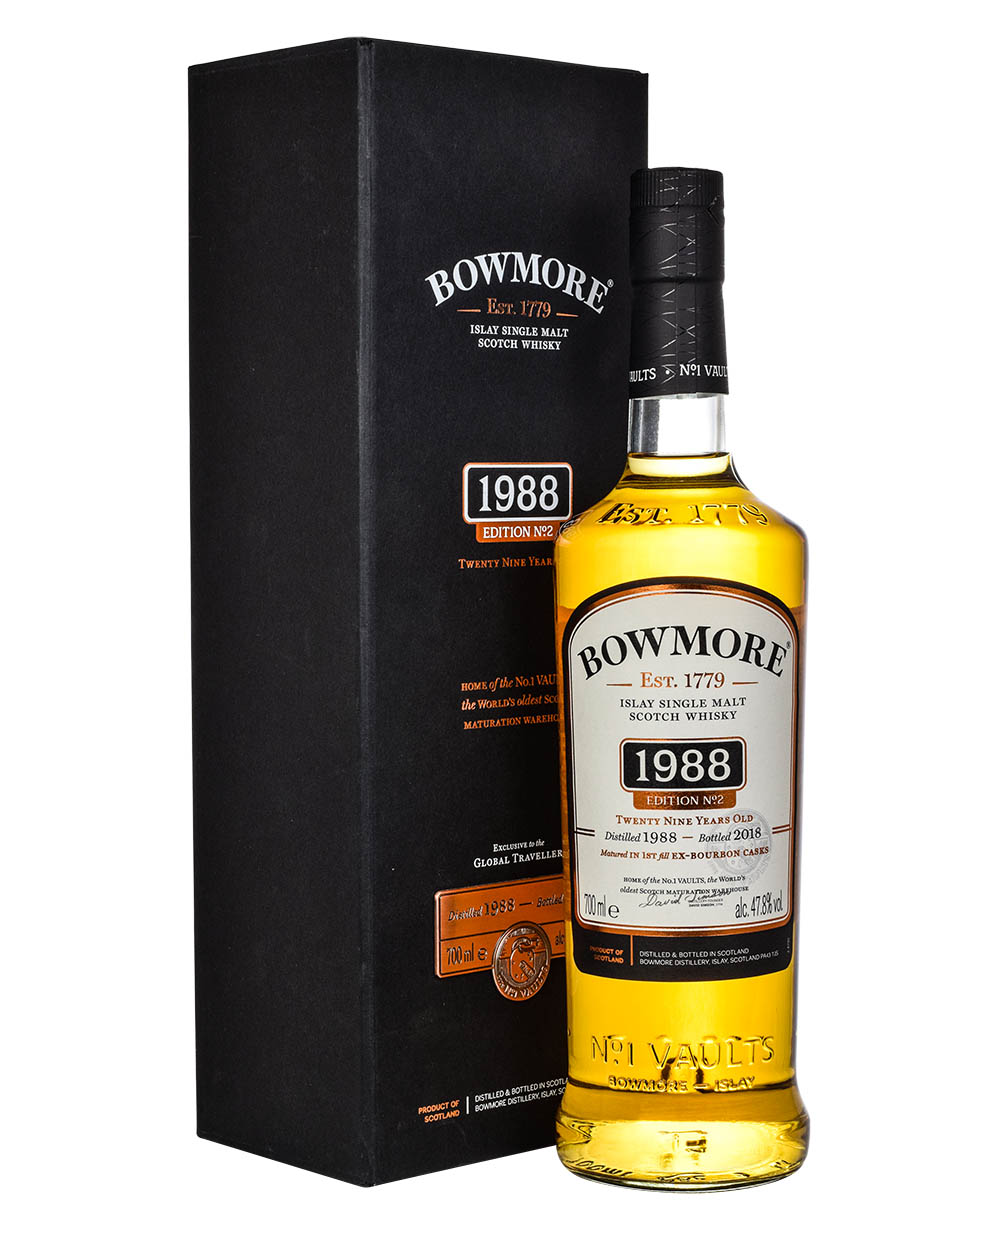 Bowmore 29 Years Old 1988 Edition No. 2 Box Must Have Malts MHM